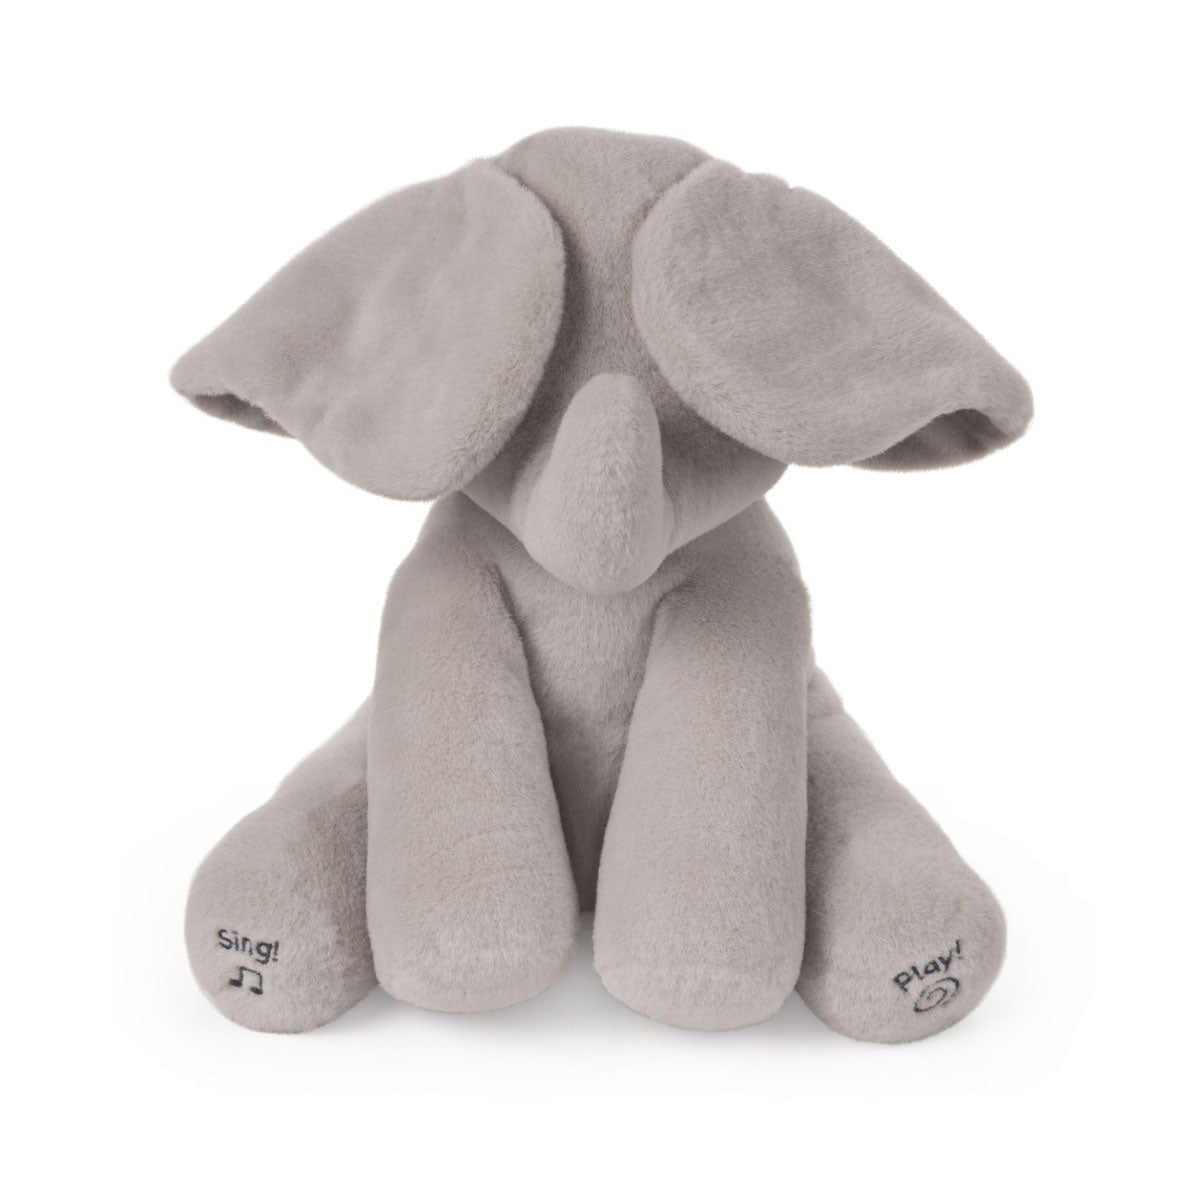 Animated Flappy Elephant 12in from Gund